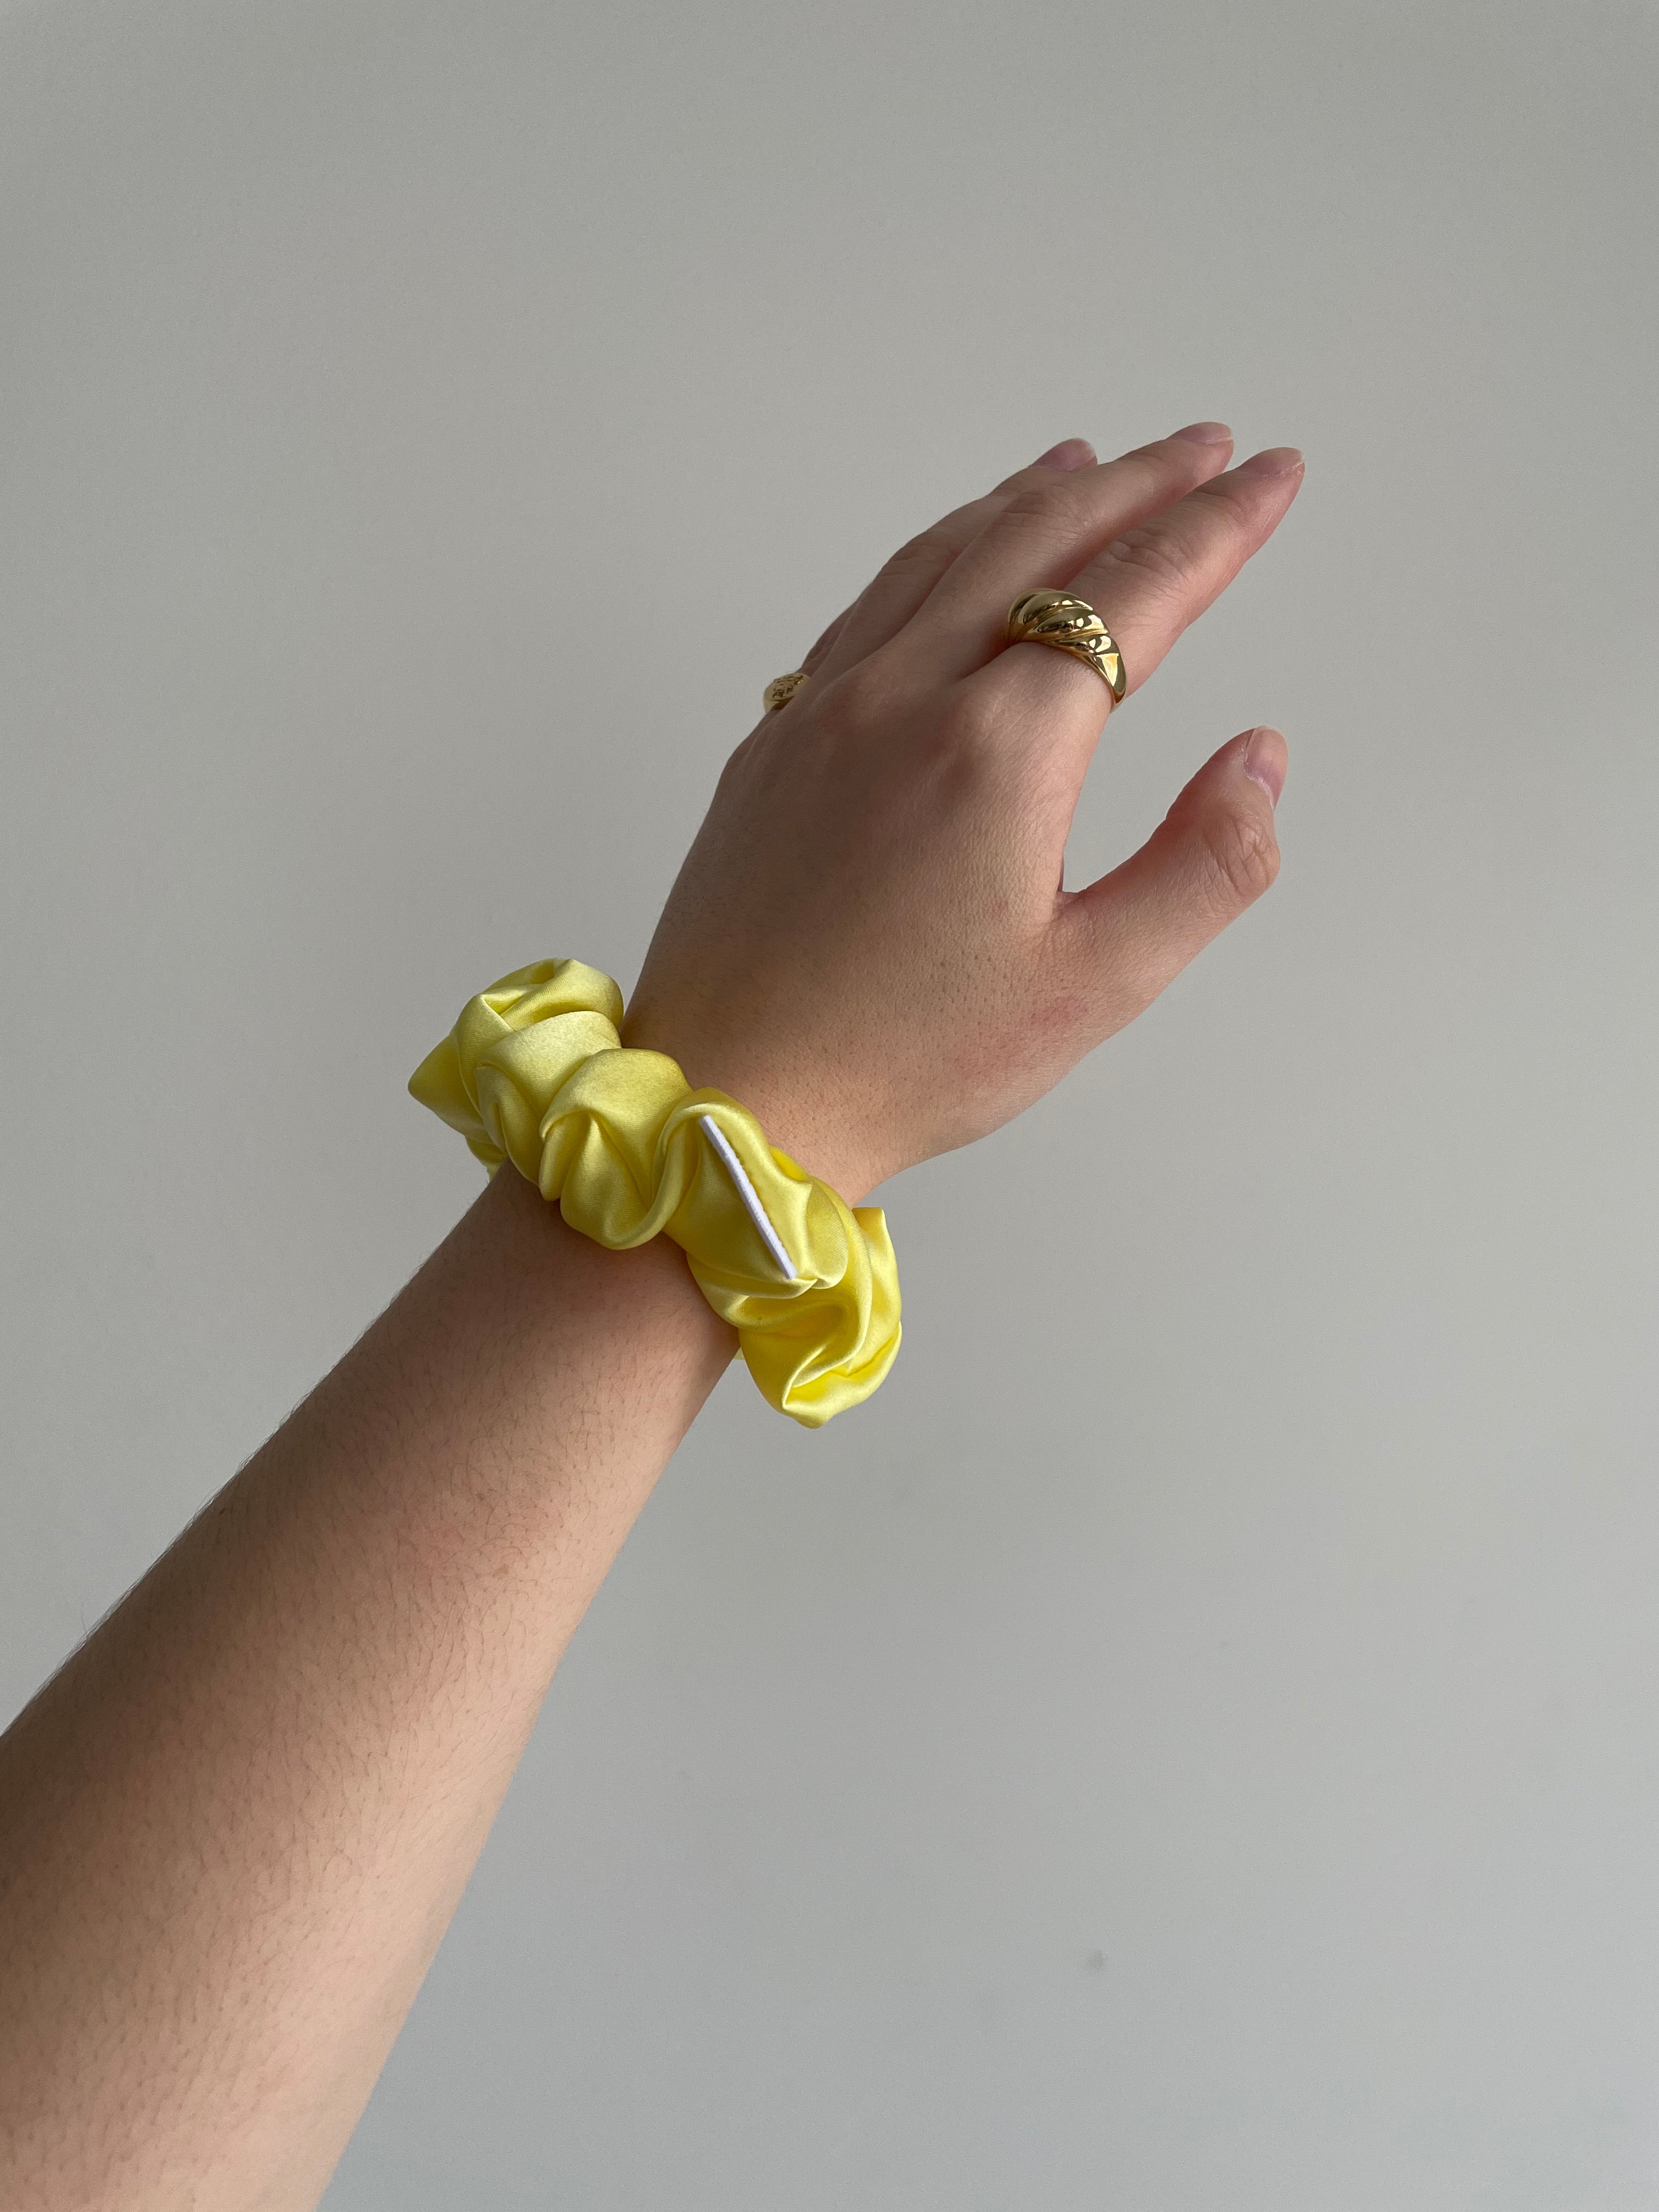 Lemon Silk Scrunchie in Beau size on woman's wrist. All scrunchies are handmade in Toronto, Canada and a tree is planted with every order.